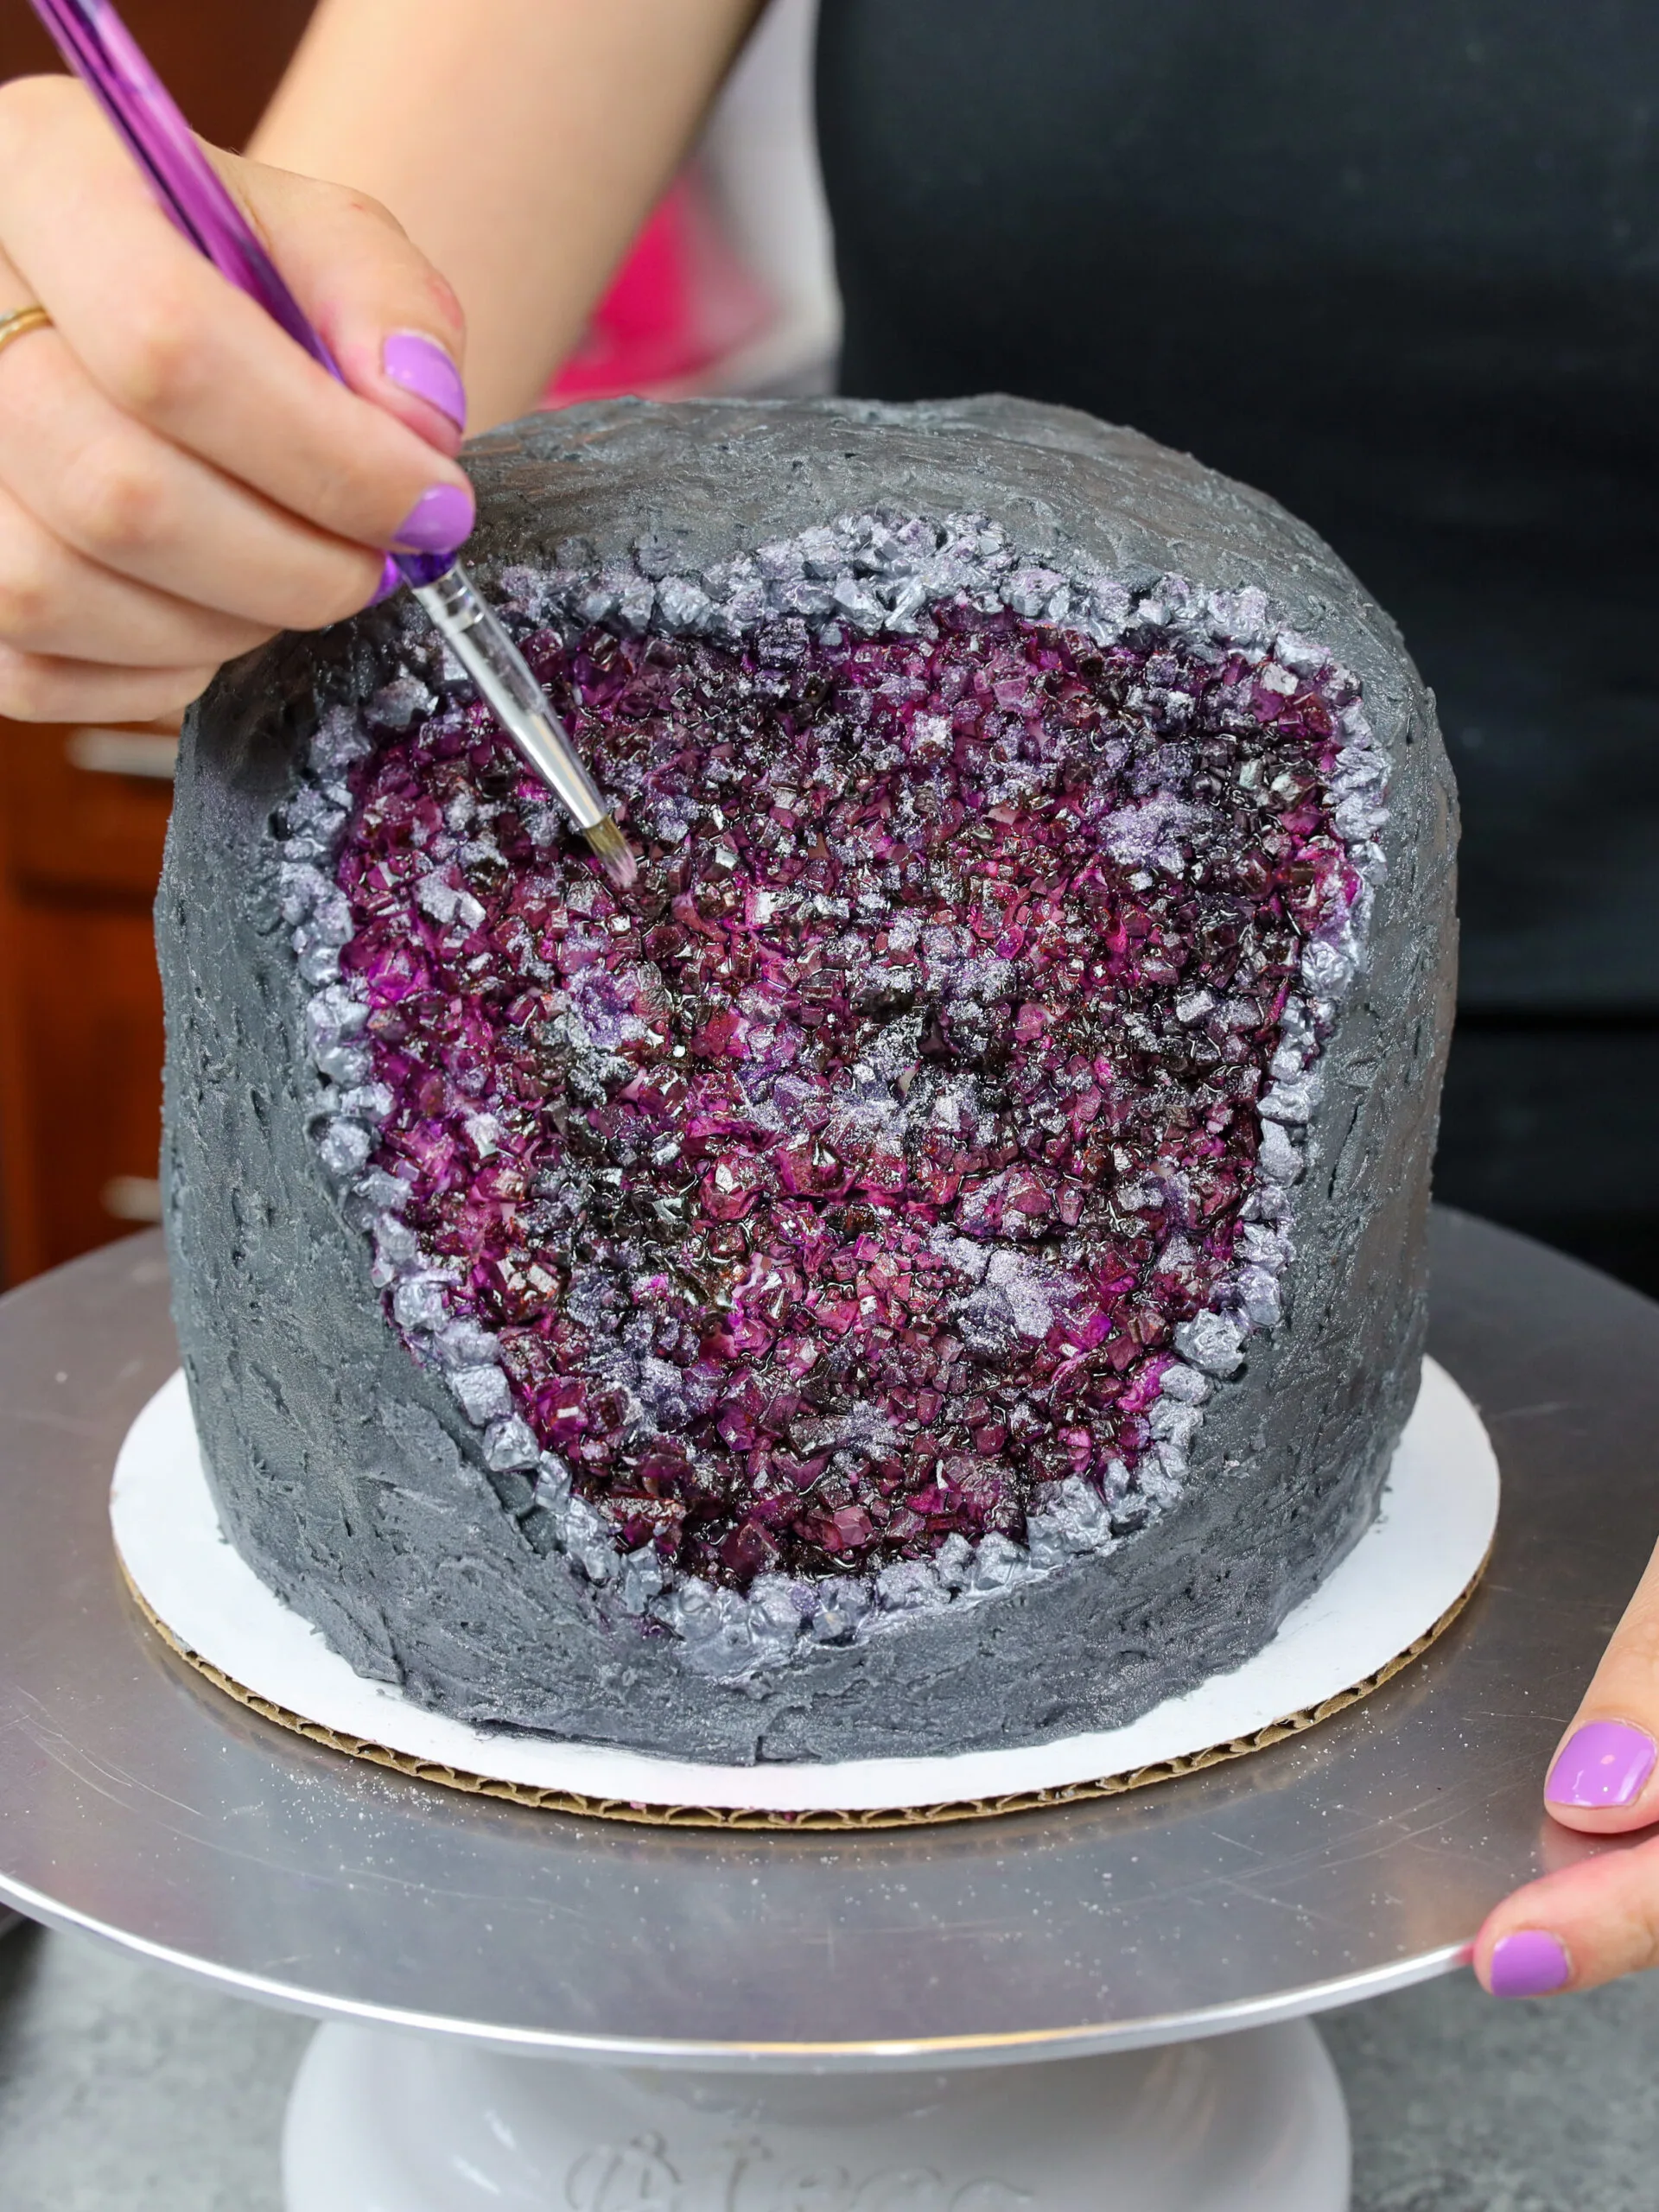 https://chelsweets.com/wp-content/uploads/2022/08/finished-purple-amethyst-cake-finshed-with-paint-brush-edited-scaled.jpg.webp